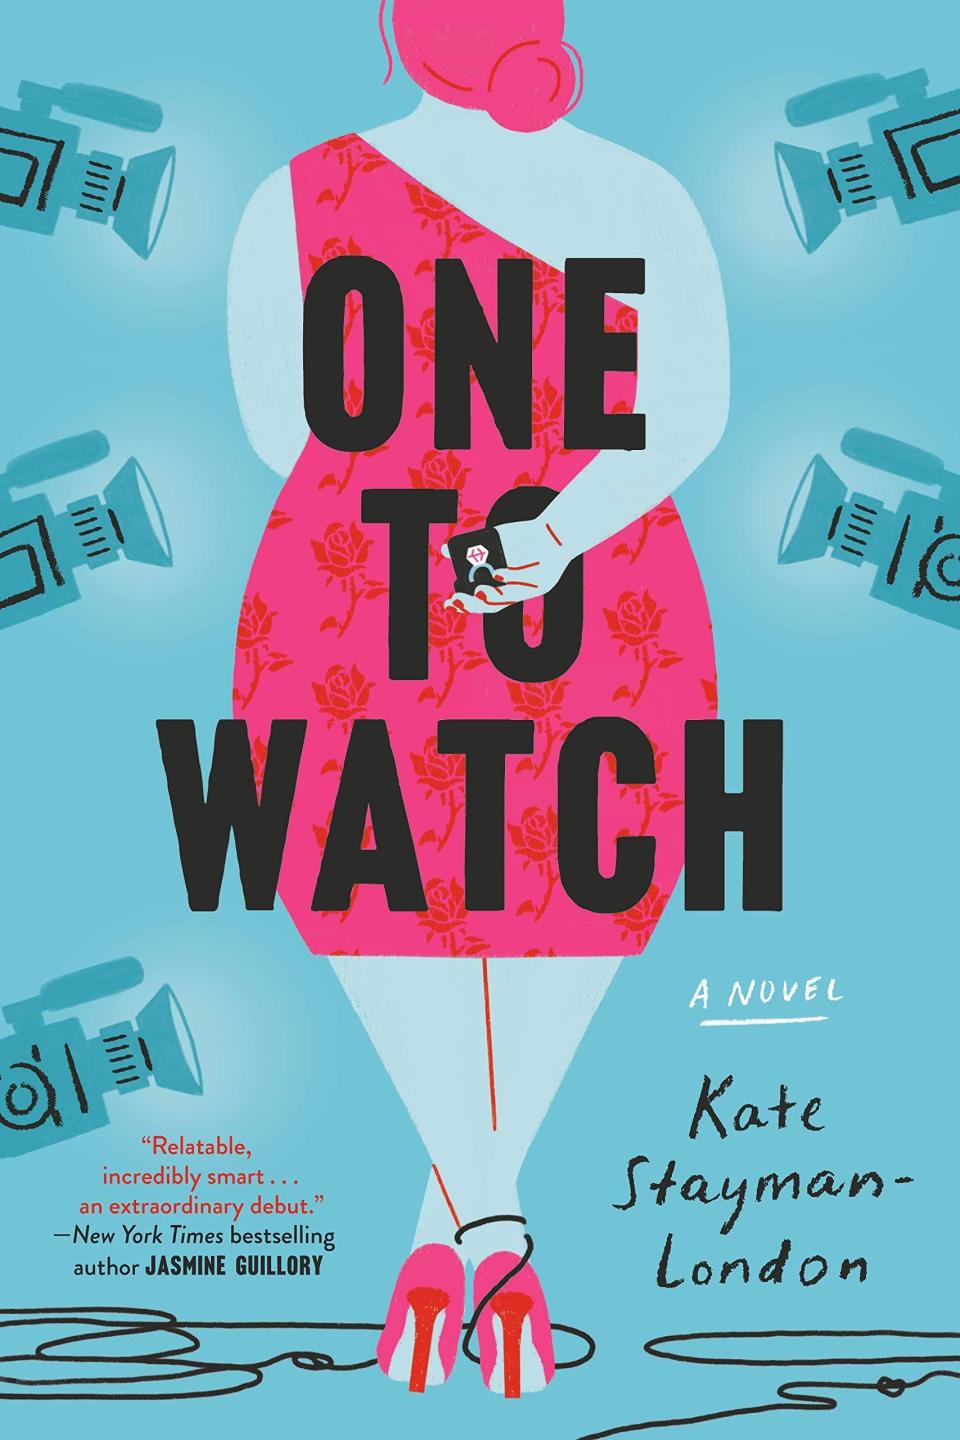 17) ‘One to Watch’ by Kate Stayman-London